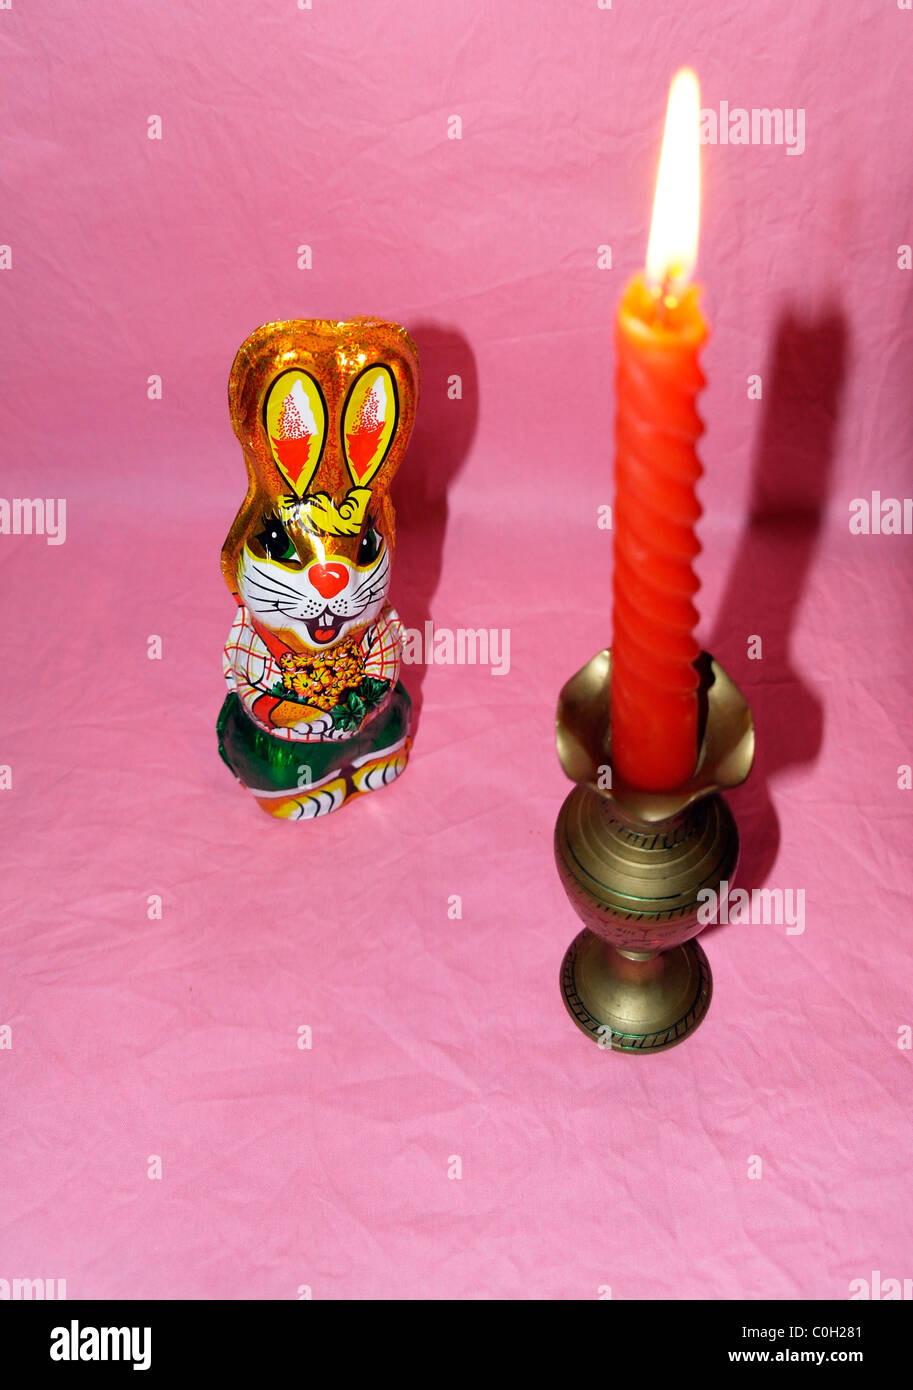 Chocolate hare in a colorful wrapper and a burning candle in a candlestick Stock Photo